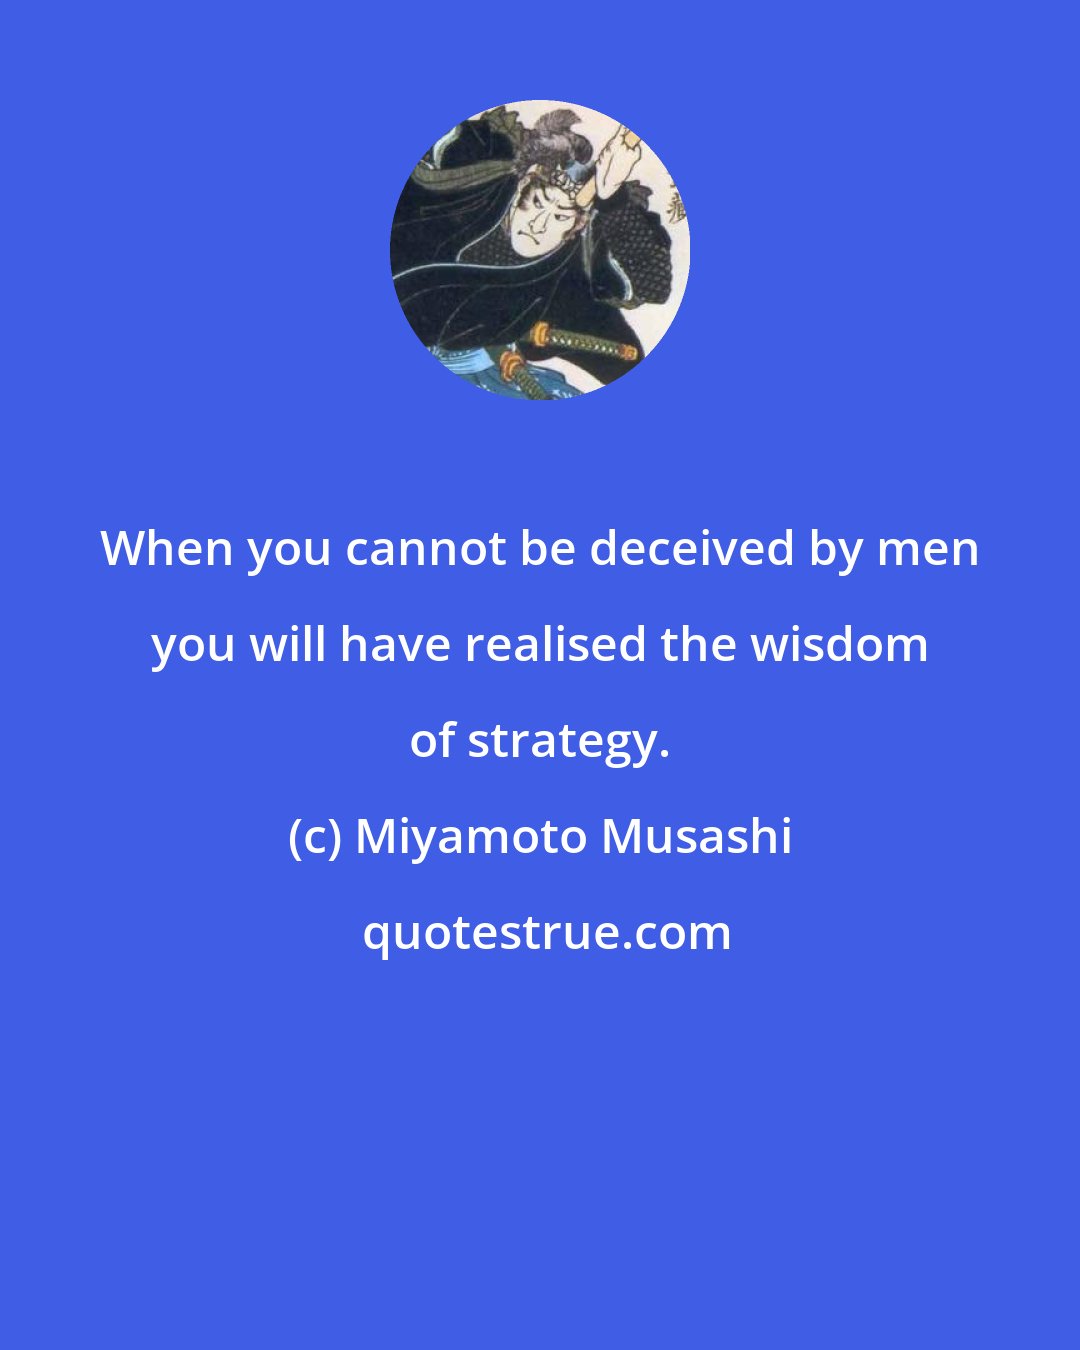 Miyamoto Musashi: When you cannot be deceived by men you will have realised the wisdom of strategy.